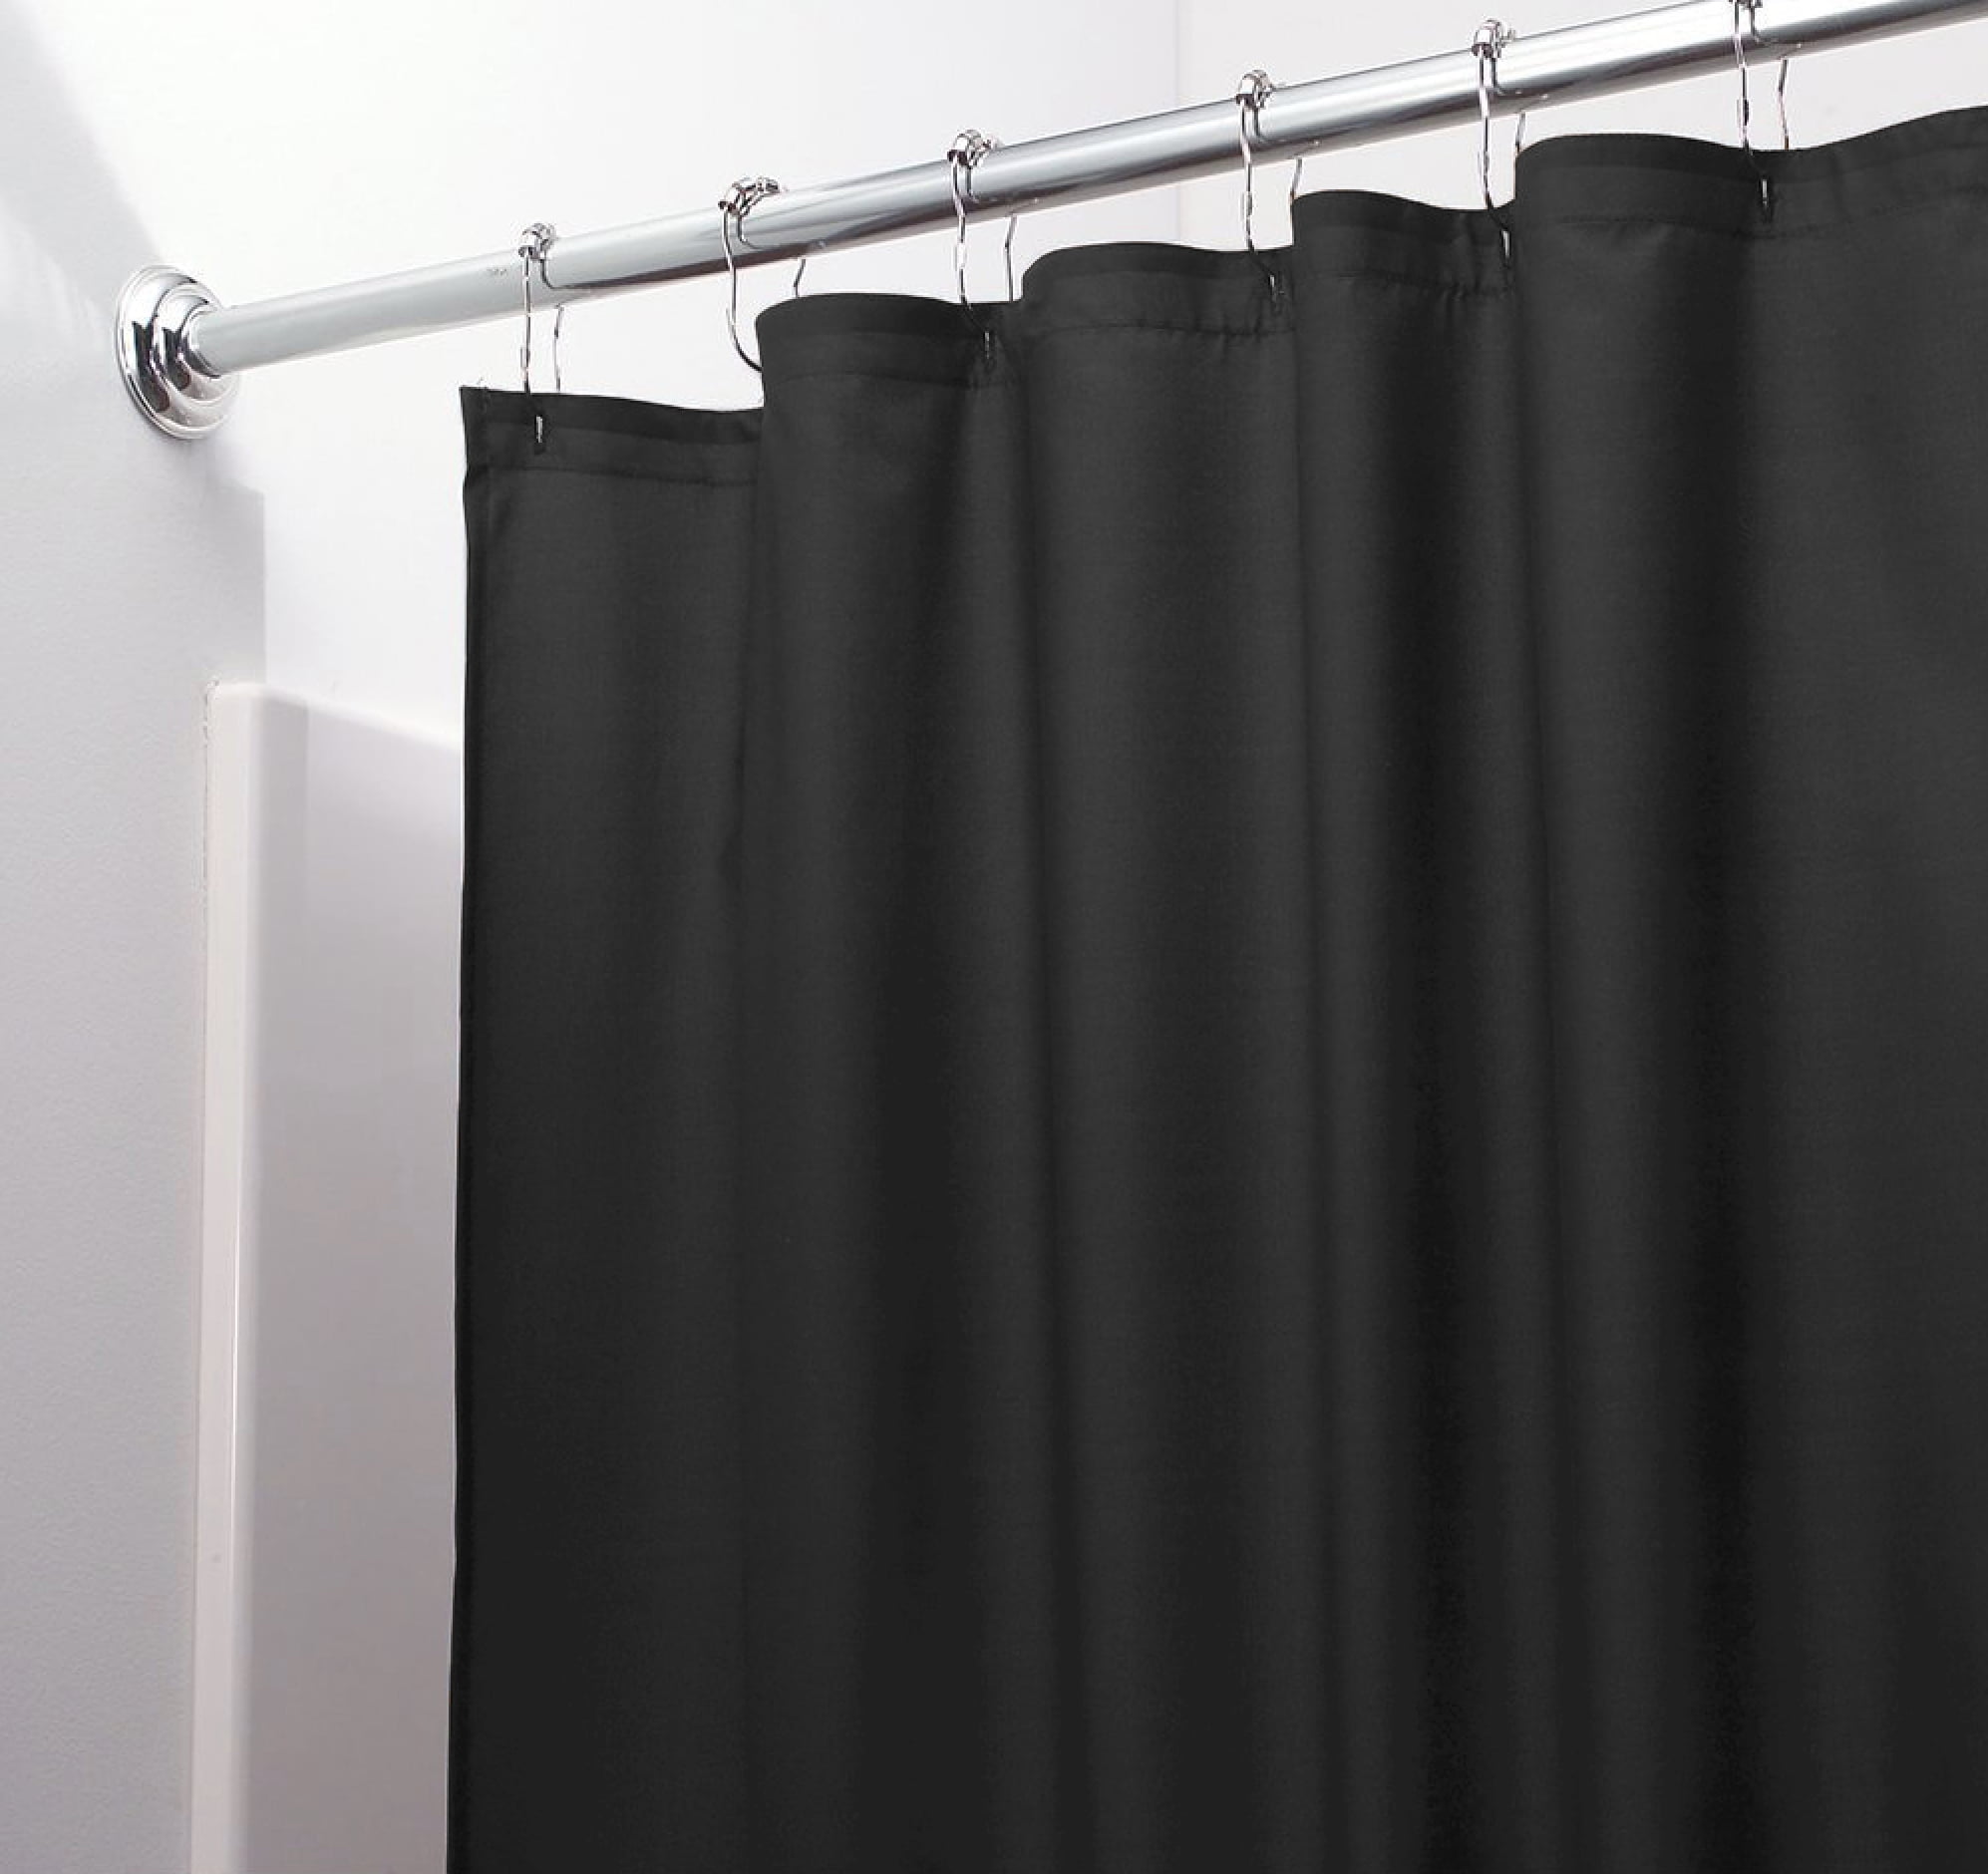 Mold Mildew Resistant Fabric Shower, Best Mold Resistant Shower Curtain Liner